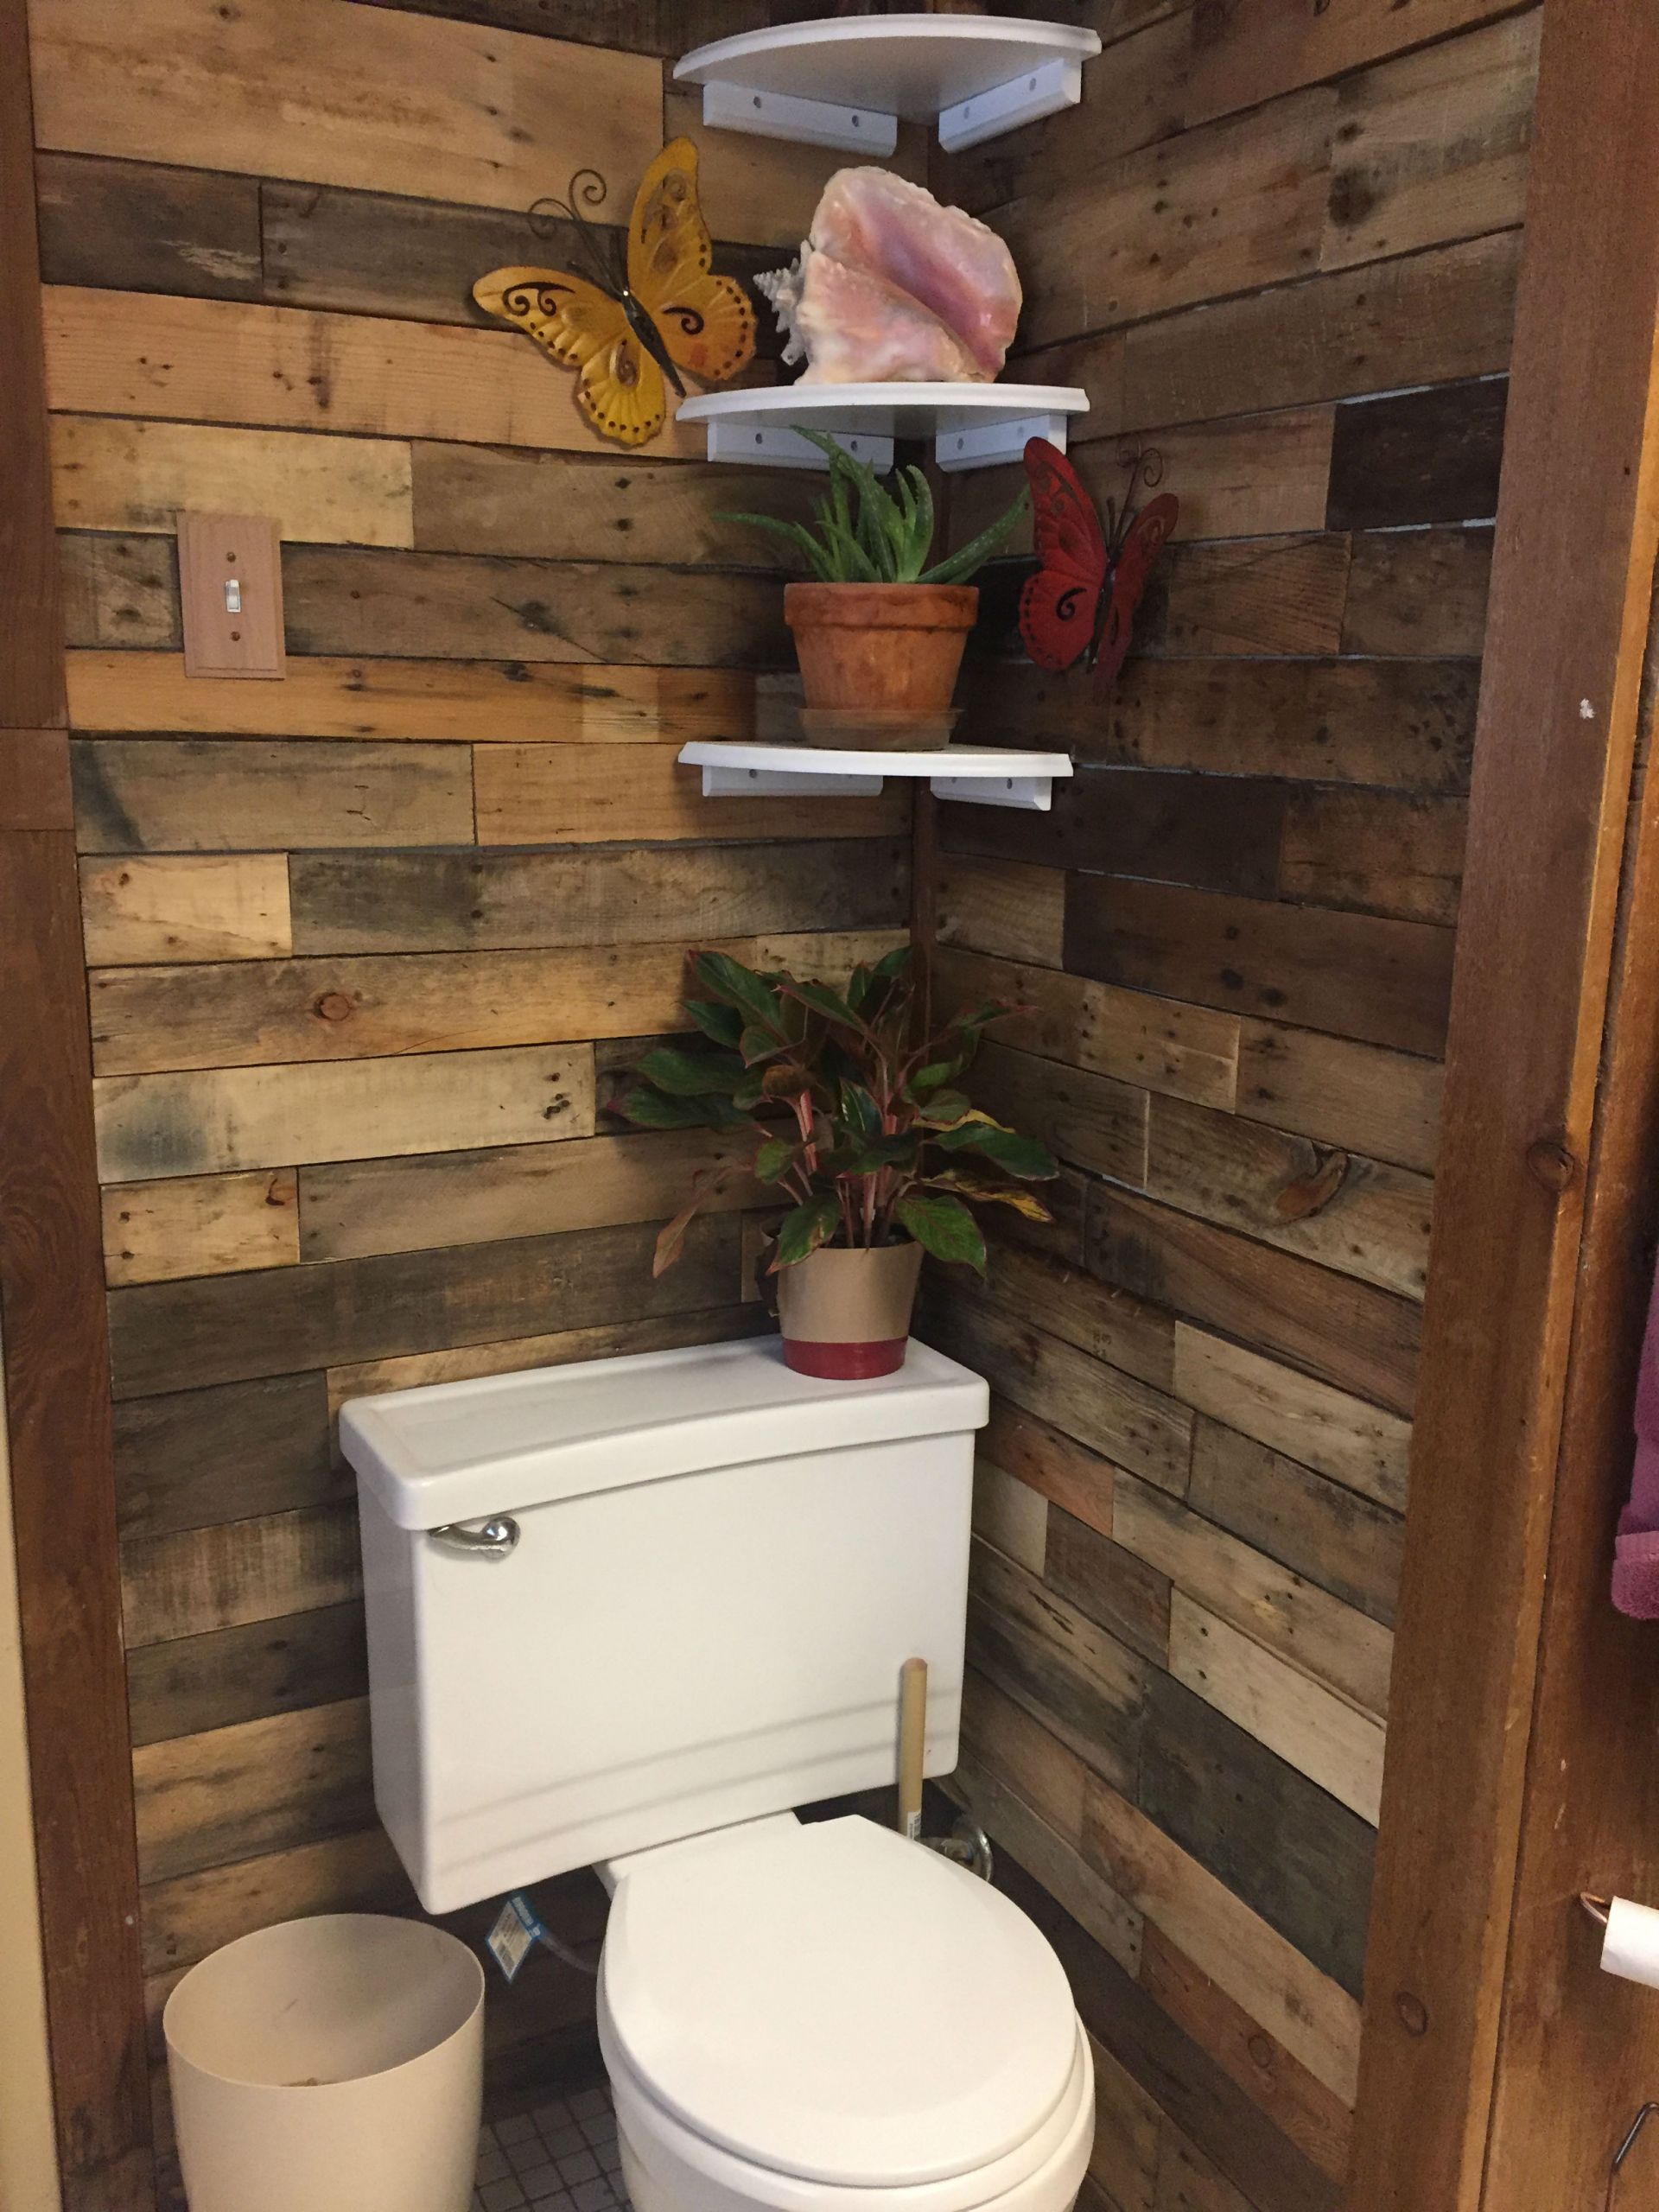 Pallet Wall Bathroom
 Inspired Wood Pallet Bathroom Projects – Ideas with Pallets